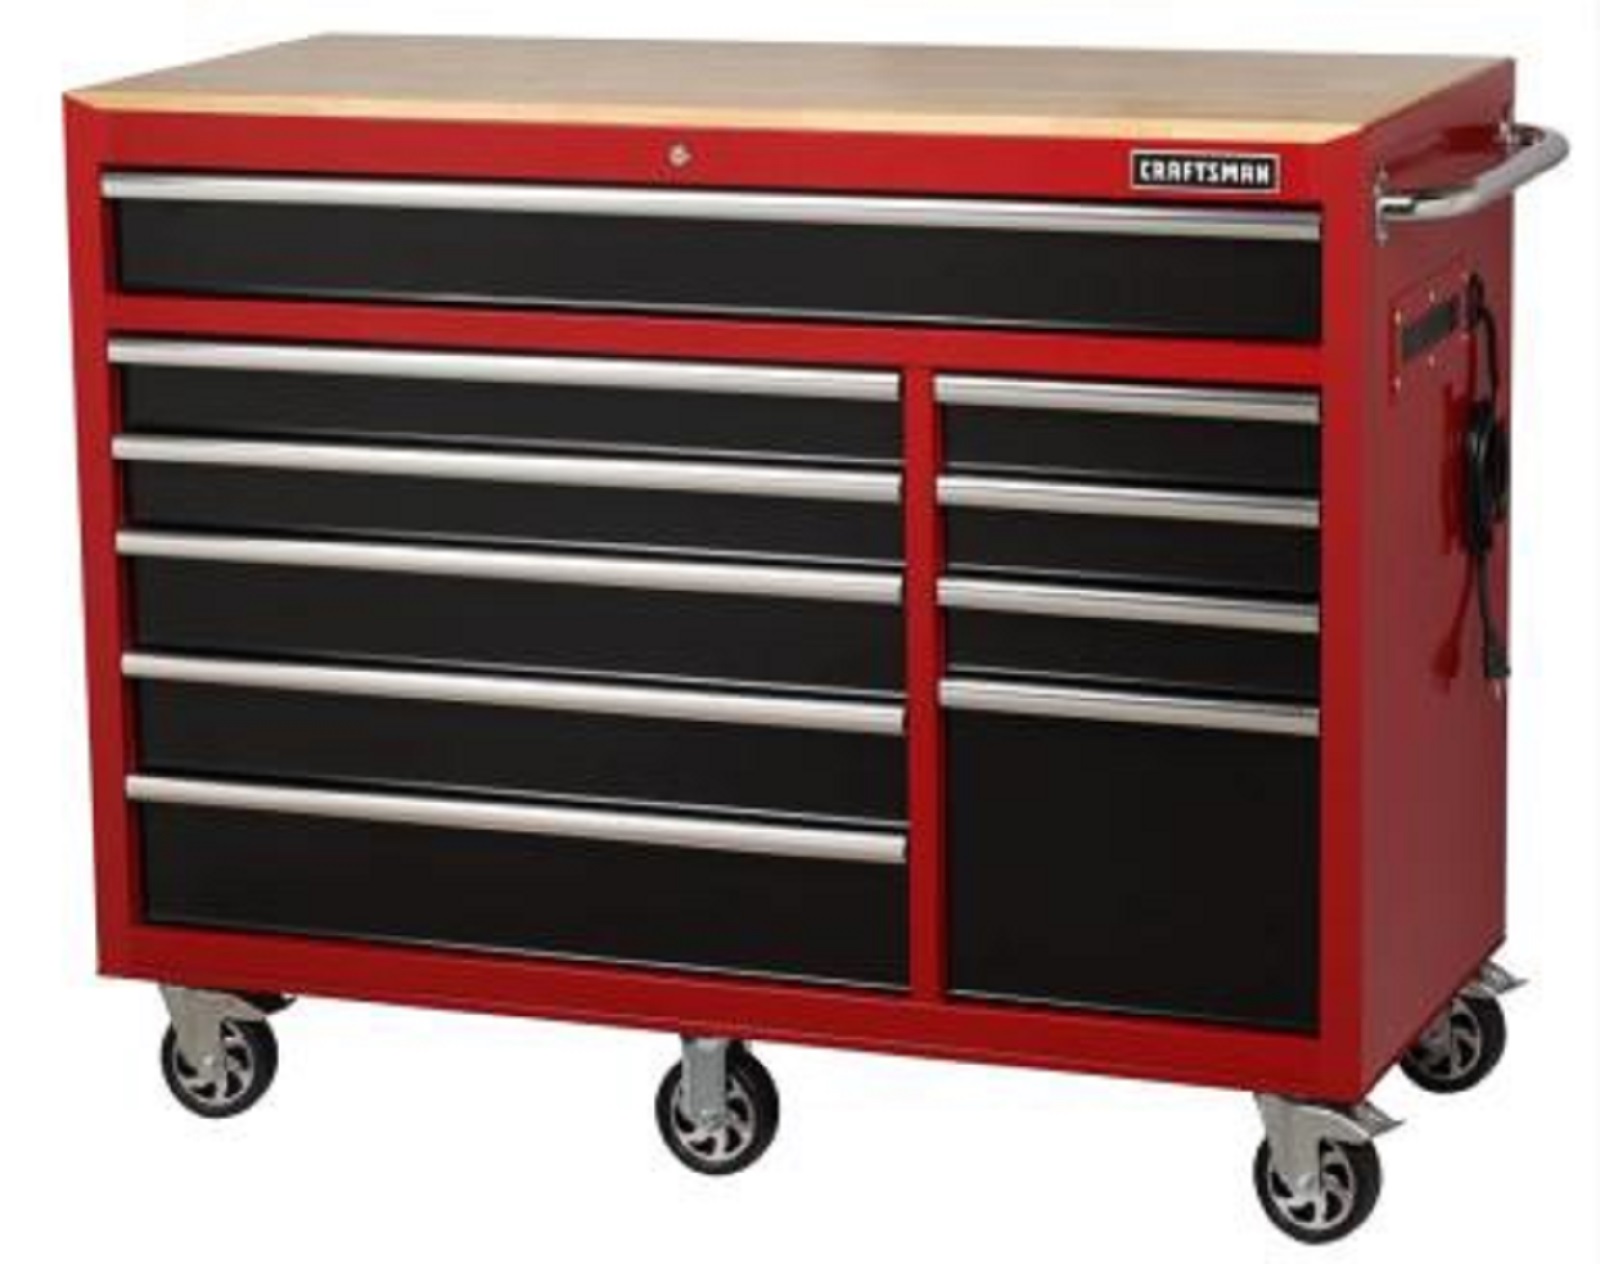 Craftsman 56 10 Drawer Rolling Cabinet, Sears Tool Storage Cabinets